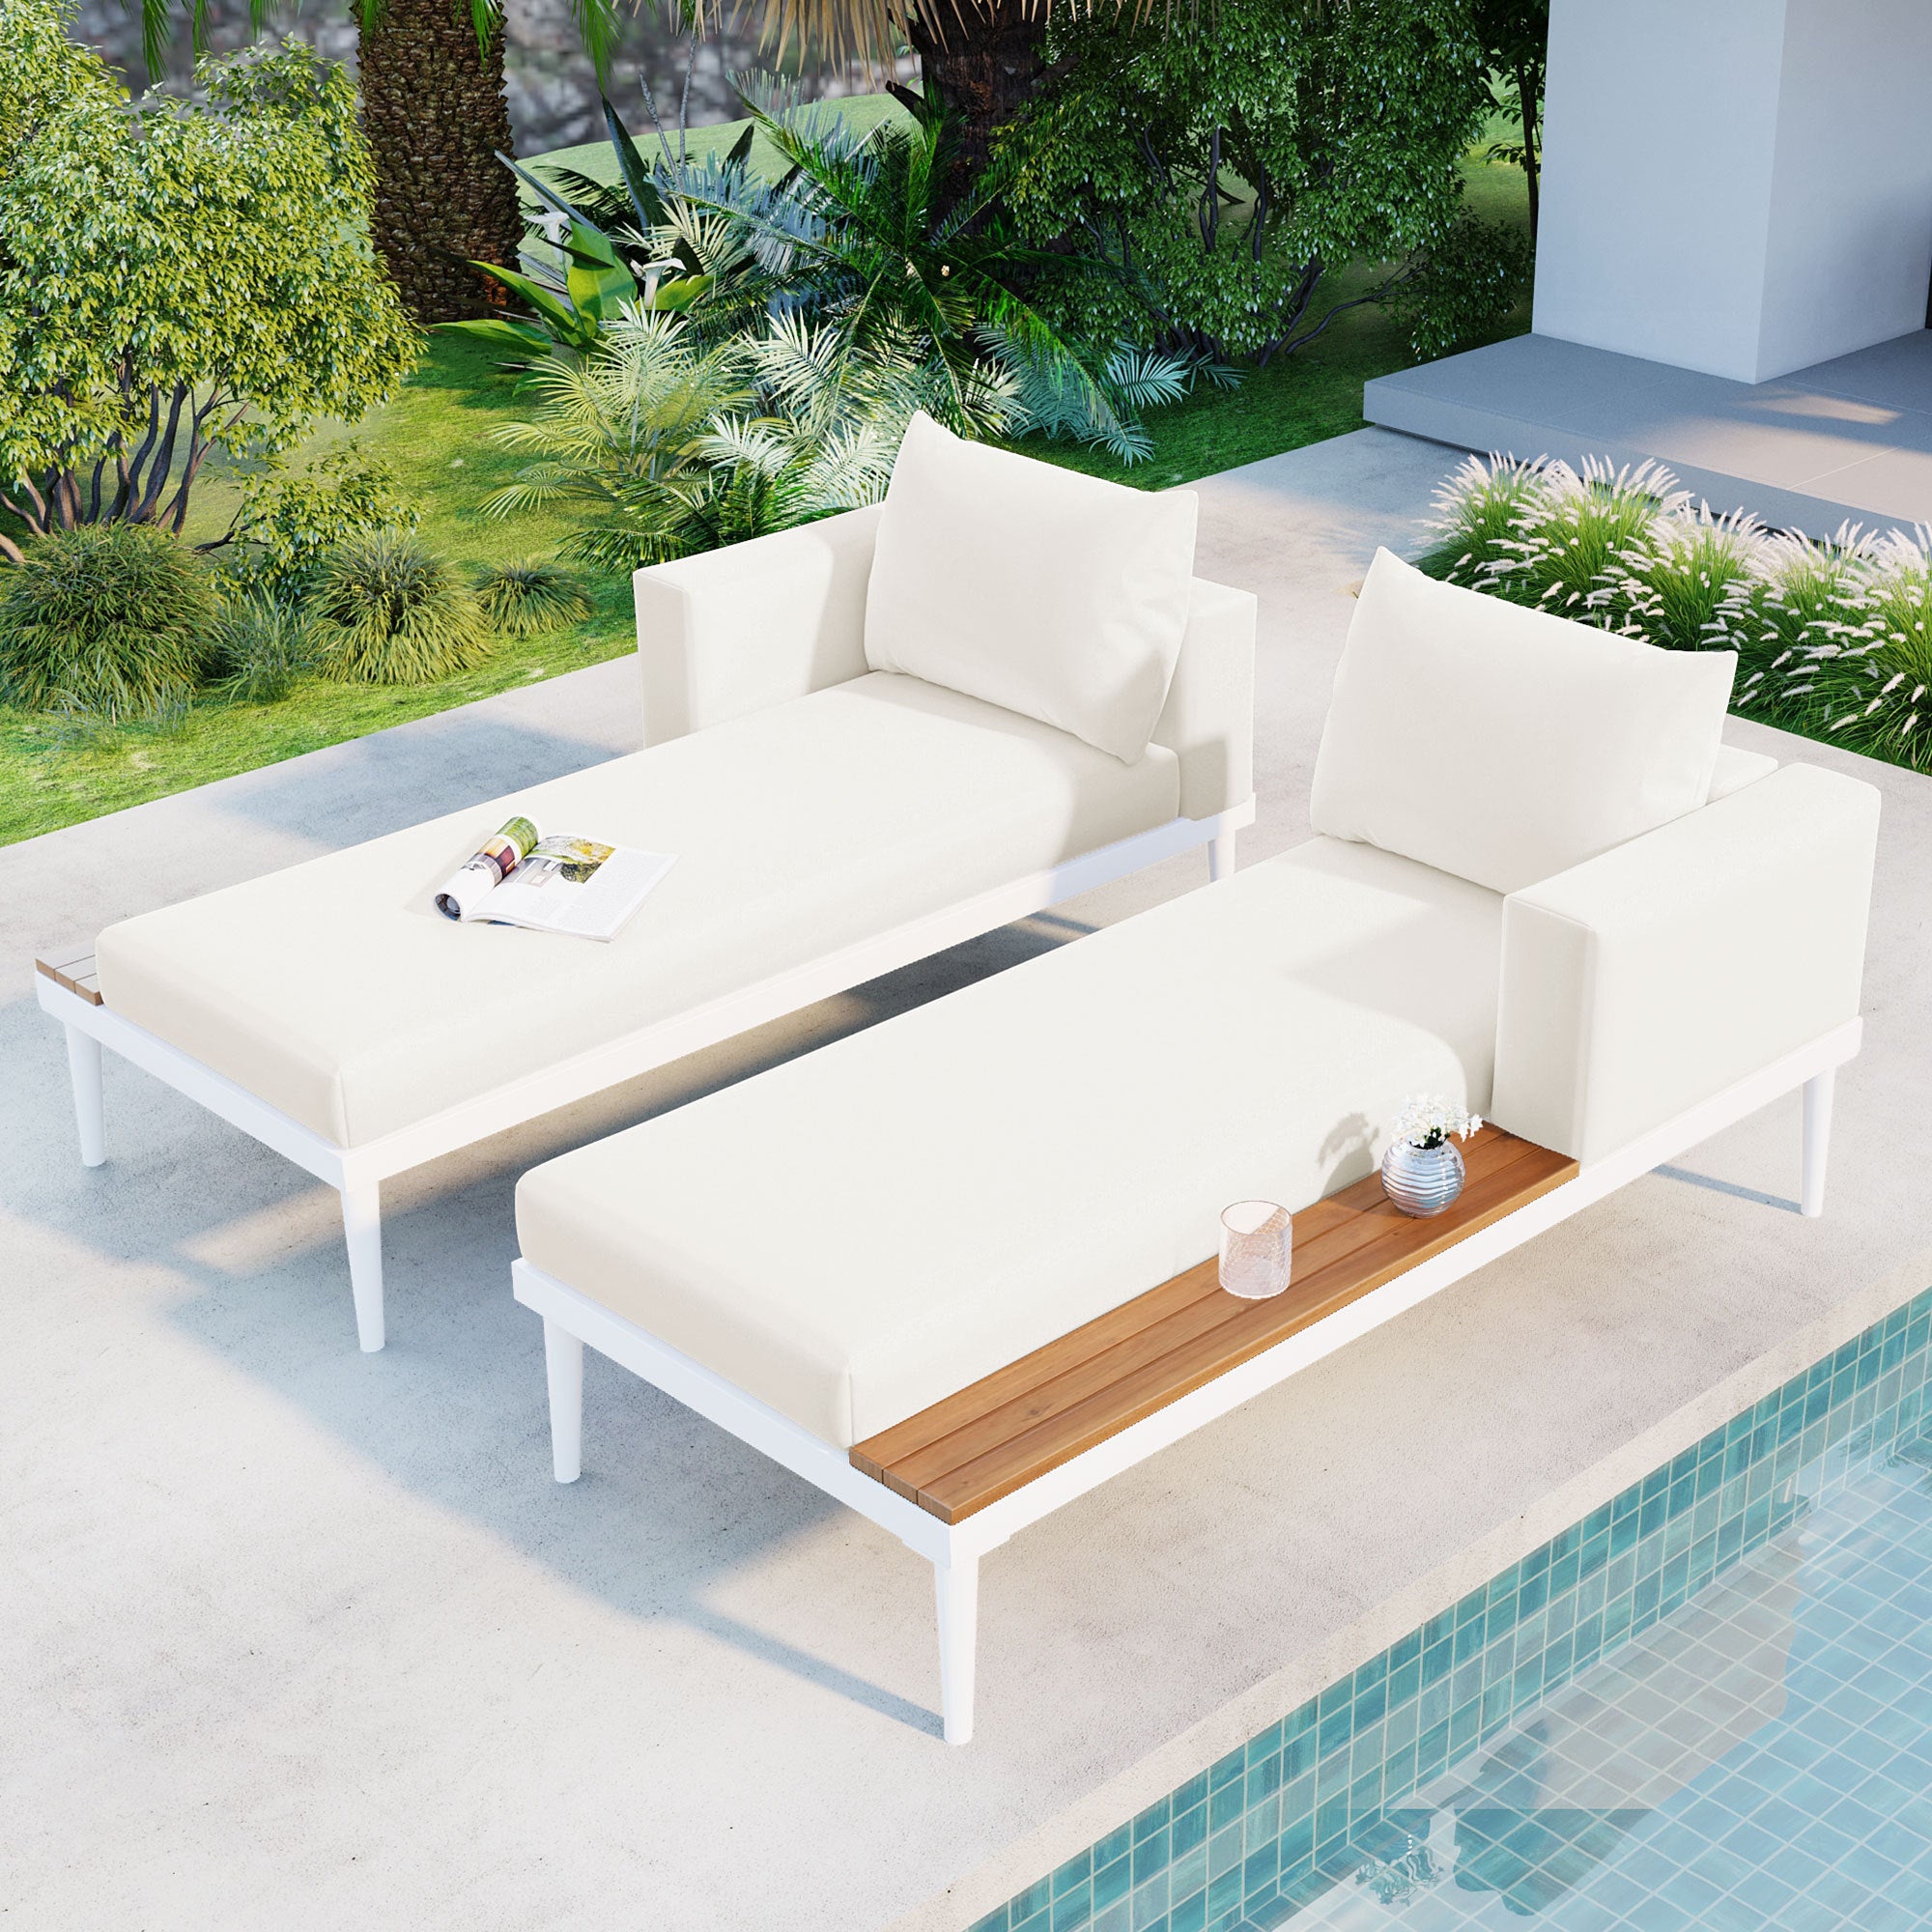 TOPMAX Modern Outdoor Daybed Patio Metal Daybed with Wood Topped Side Spaces for Drinks, 2 in 1 Padded Chaise Lounges for Poolside, Balcony, Deck, Beige